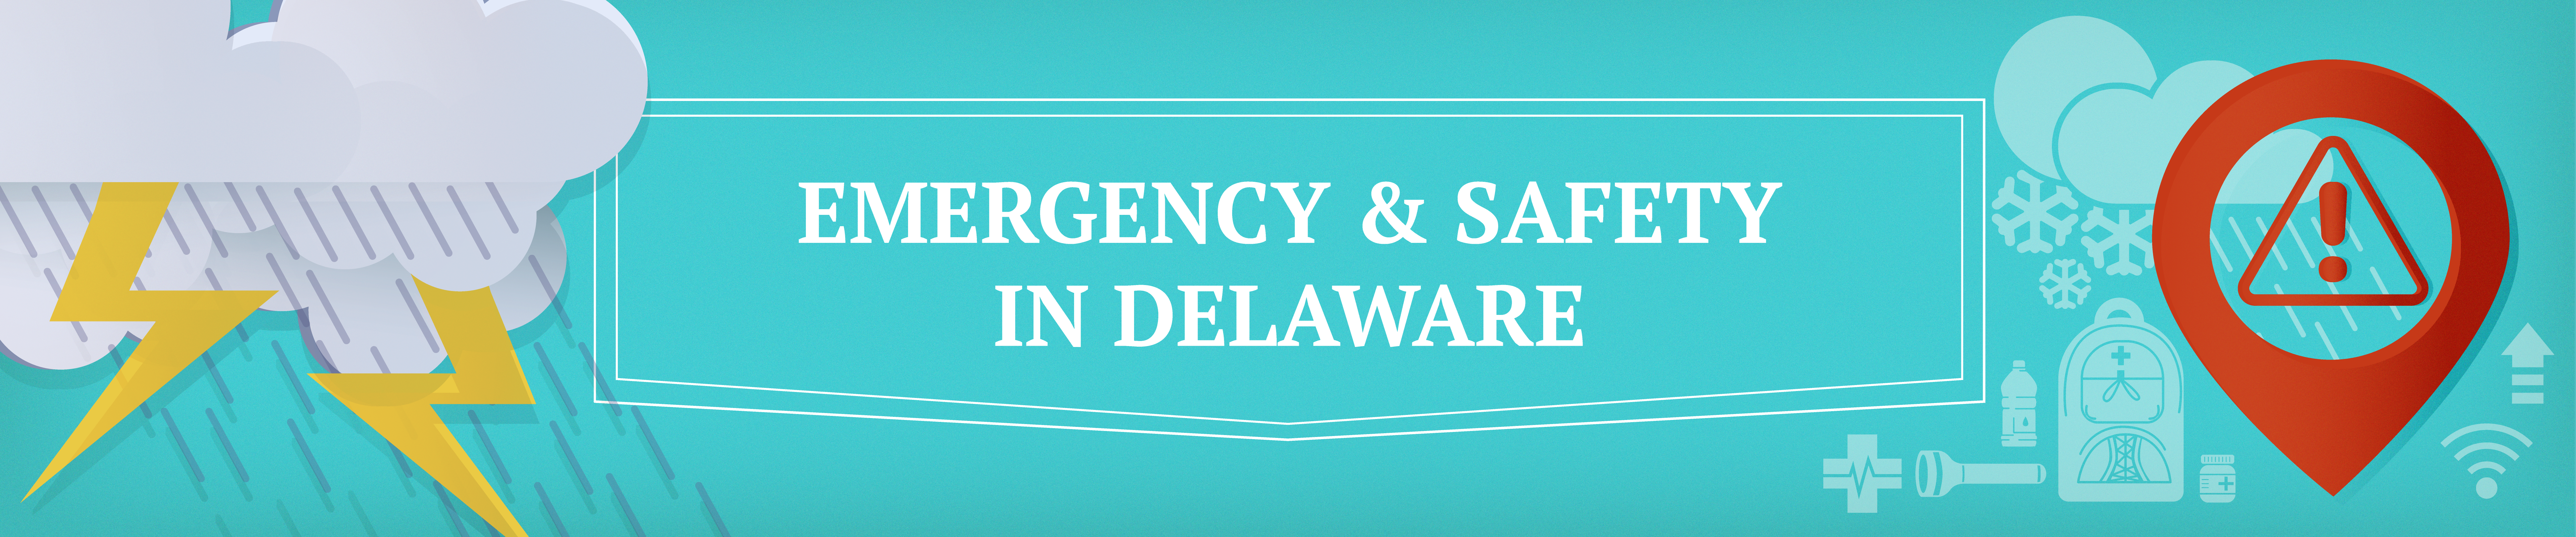 Illustration with thunderstorm clouds, a red hazard symbol and other symbols representing emergencies and safety with the words Emergency and Safety in Delaware